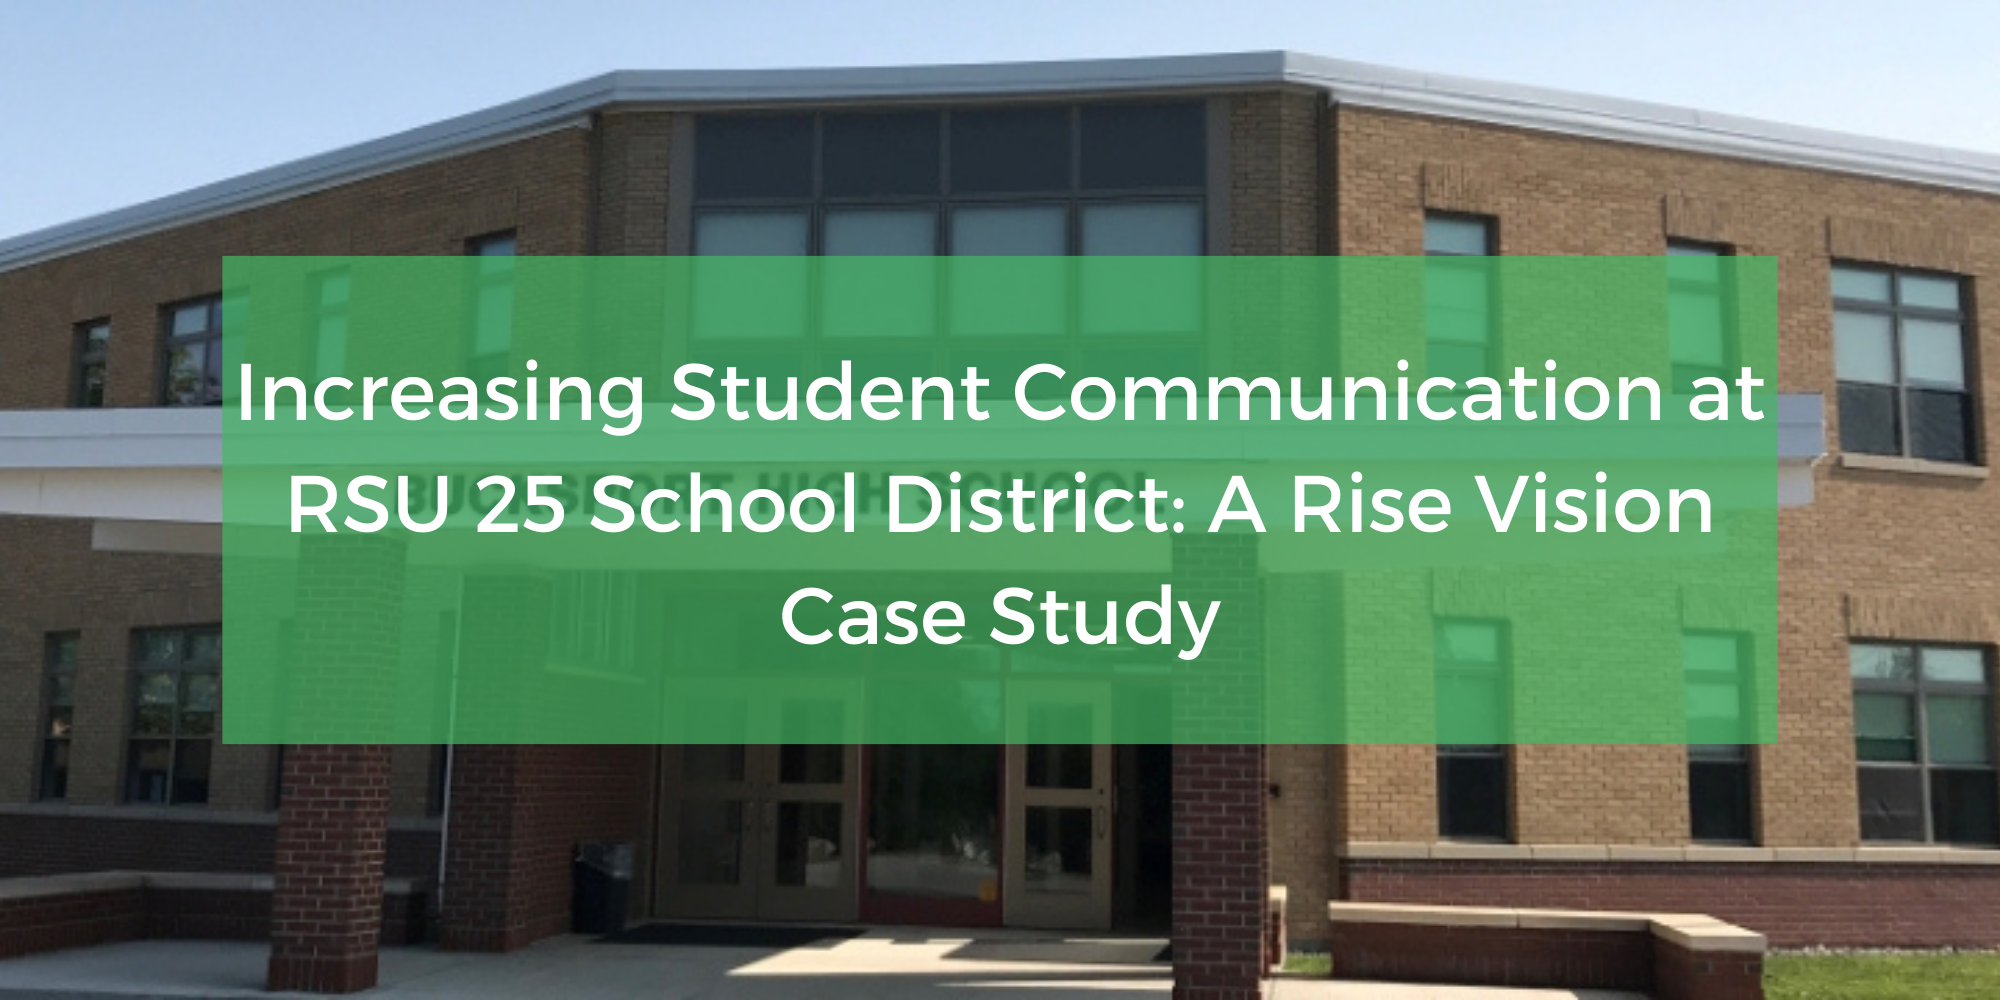 Increasing Student Communication at RSU 25 School District: A Rise Vision Case Study